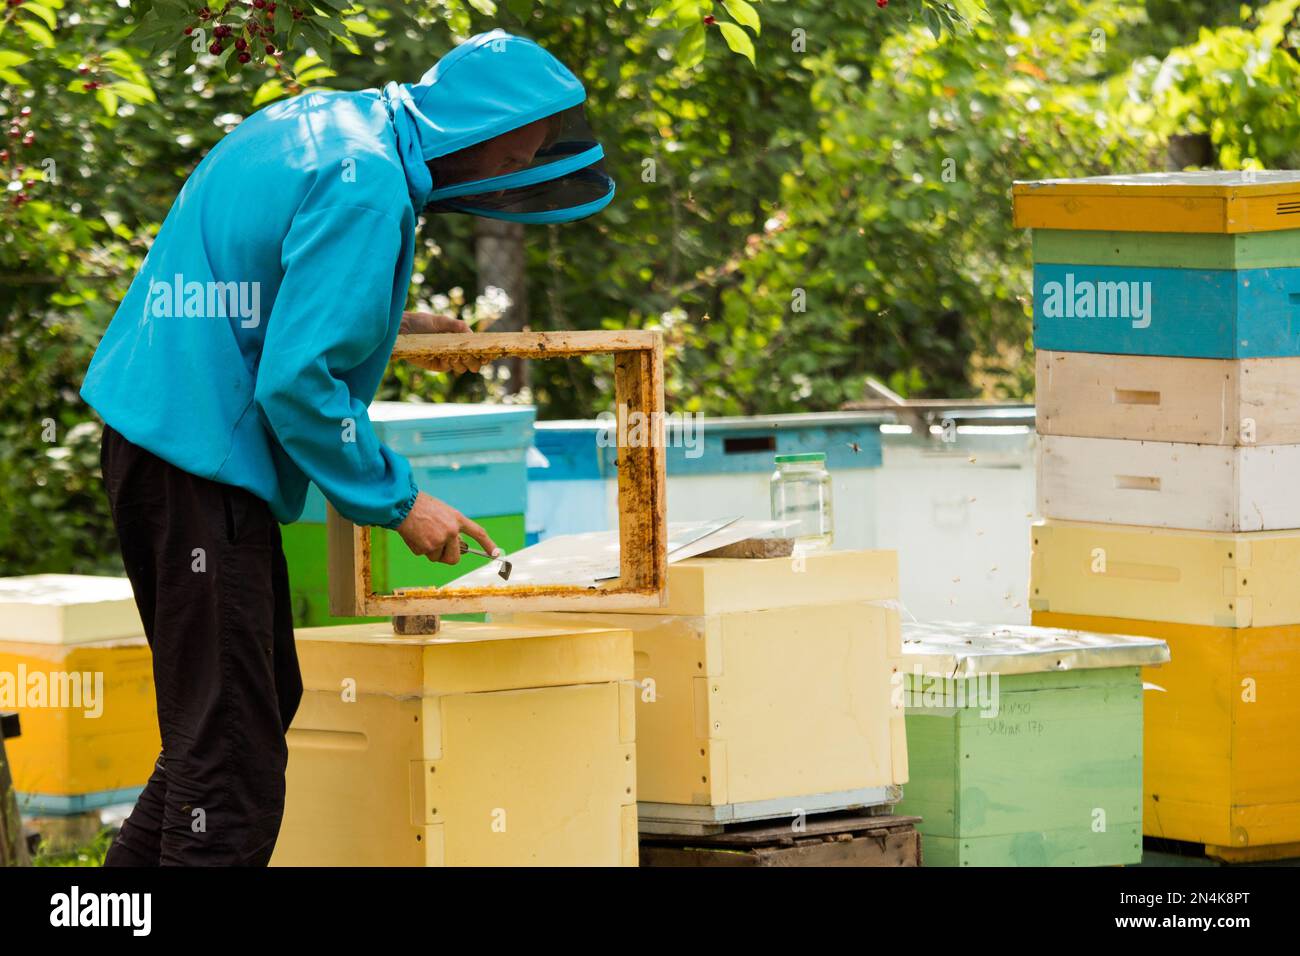 beekeeper cleans wax with hive tool from box. Processing hives. Works on the apiary. Beekeeping. Stock Photo